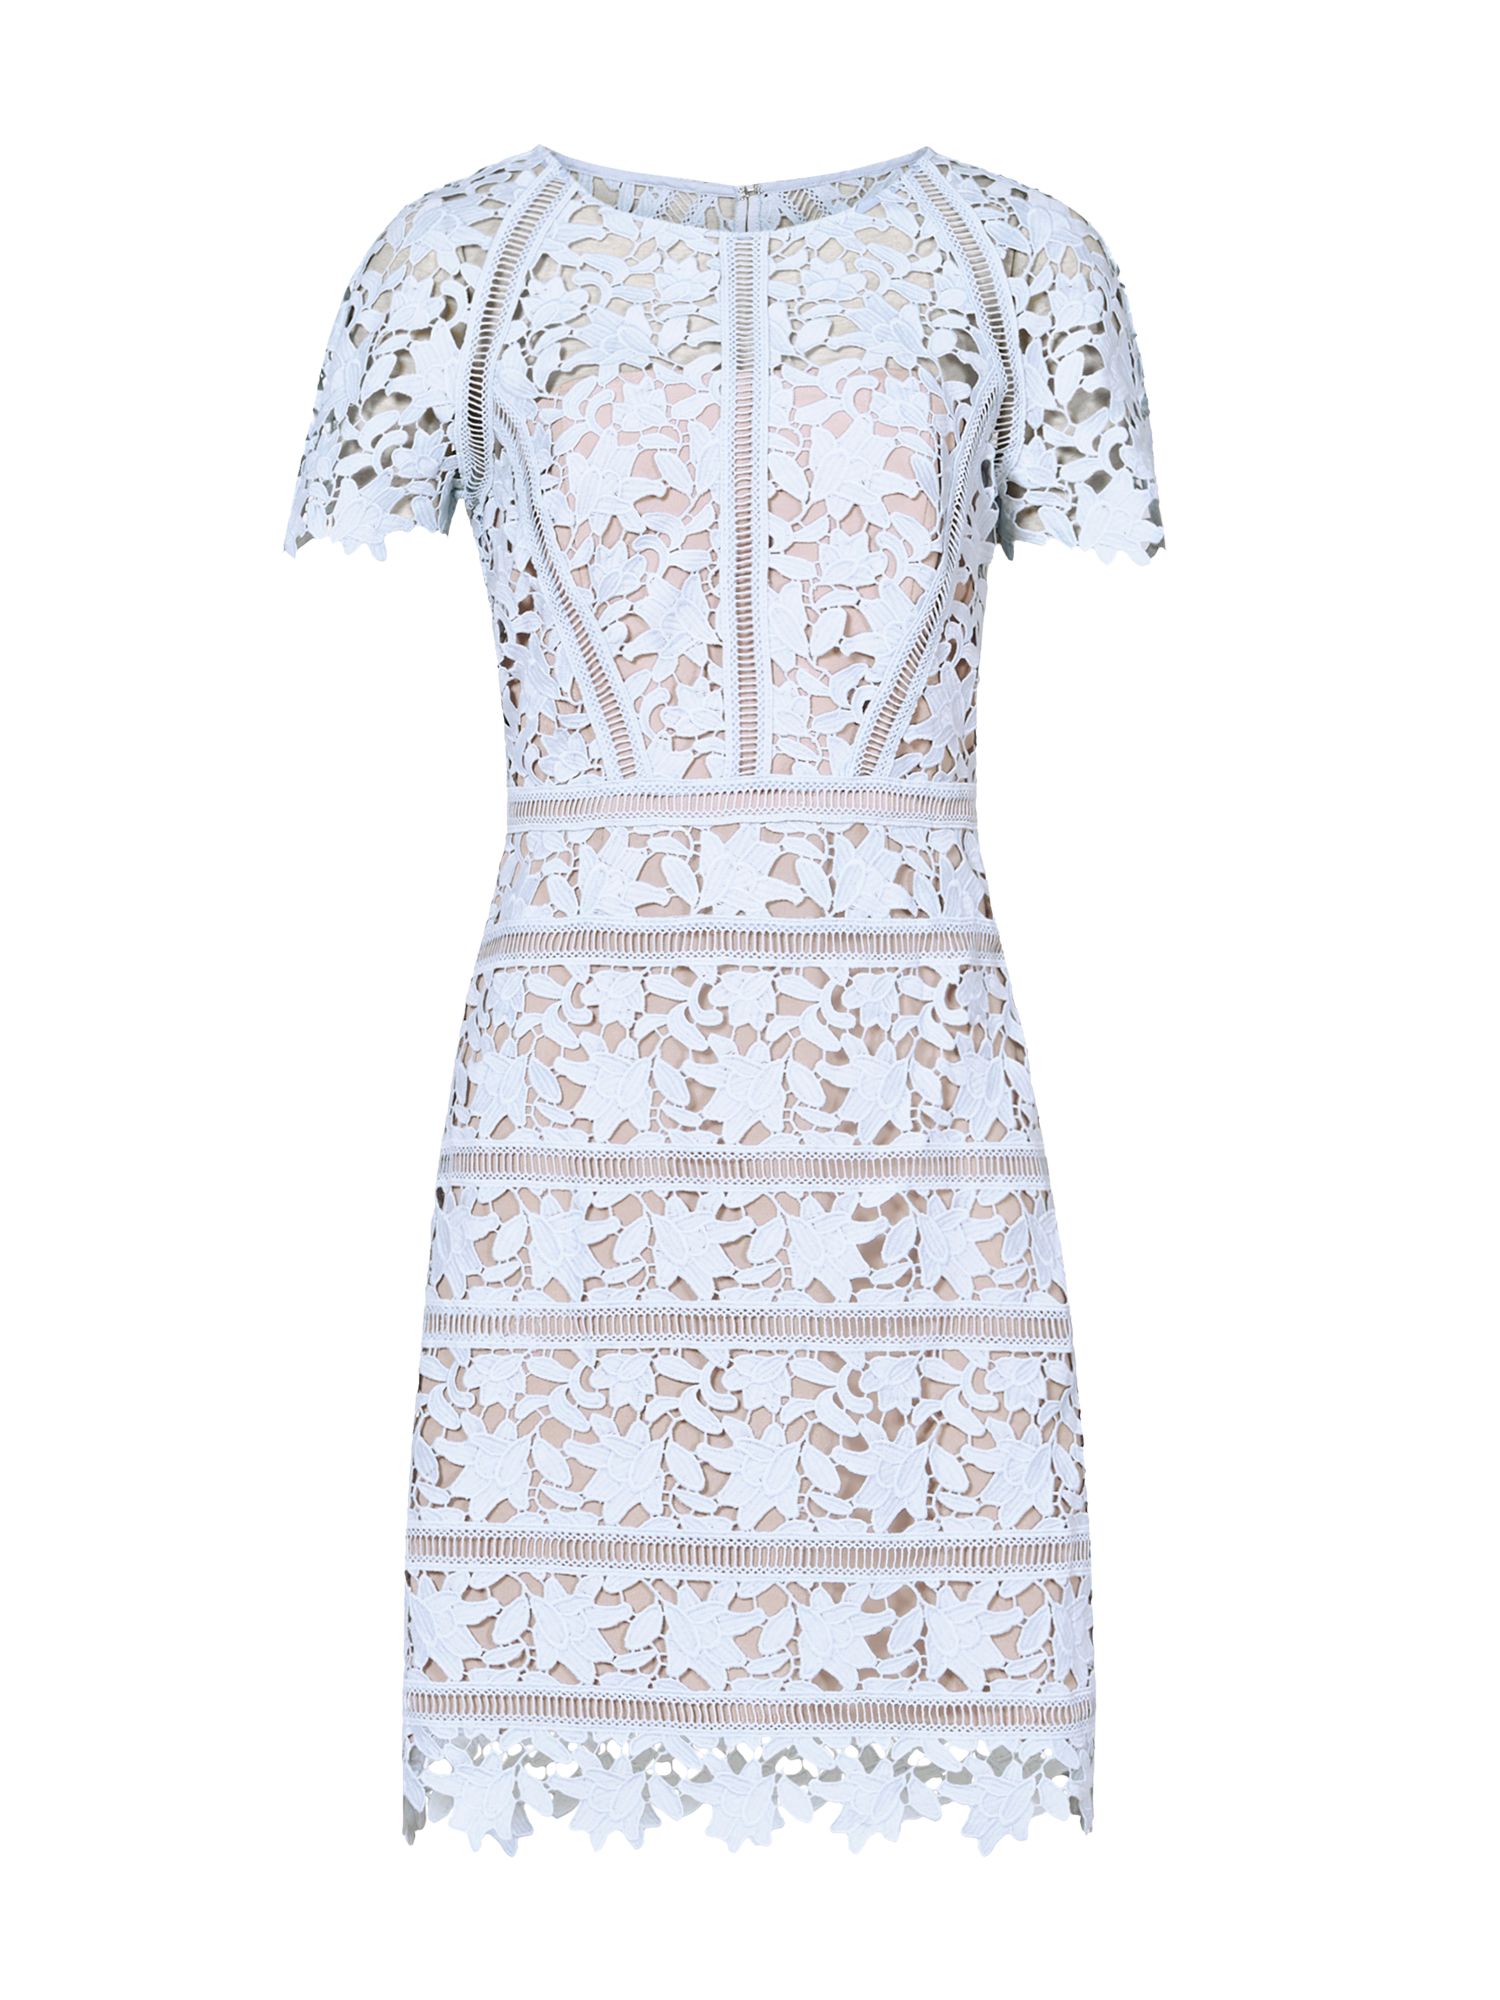 Reiss Orchid Lace Dress